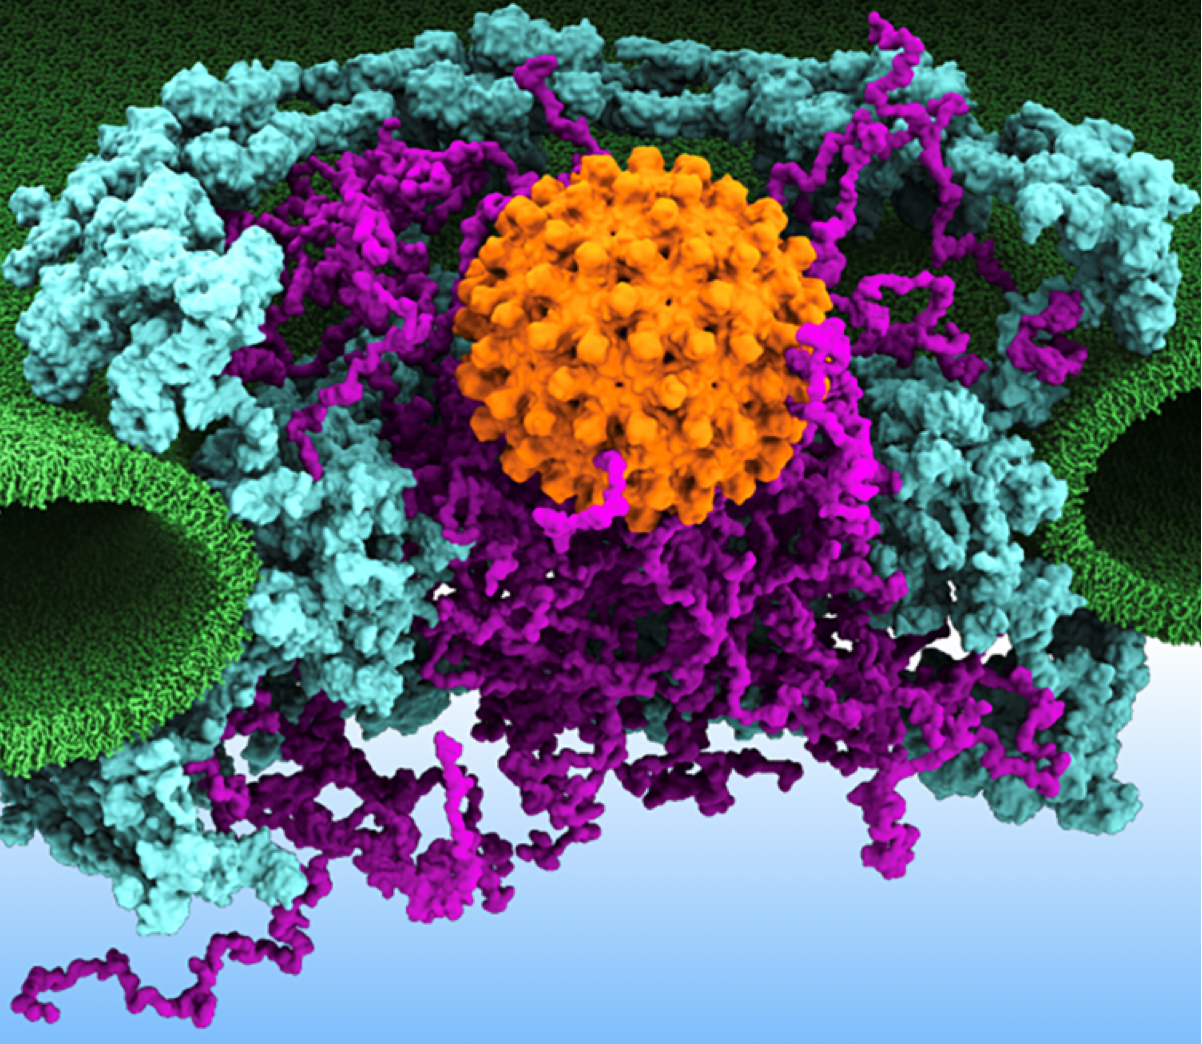 A simulation of the nuclear pore complex.